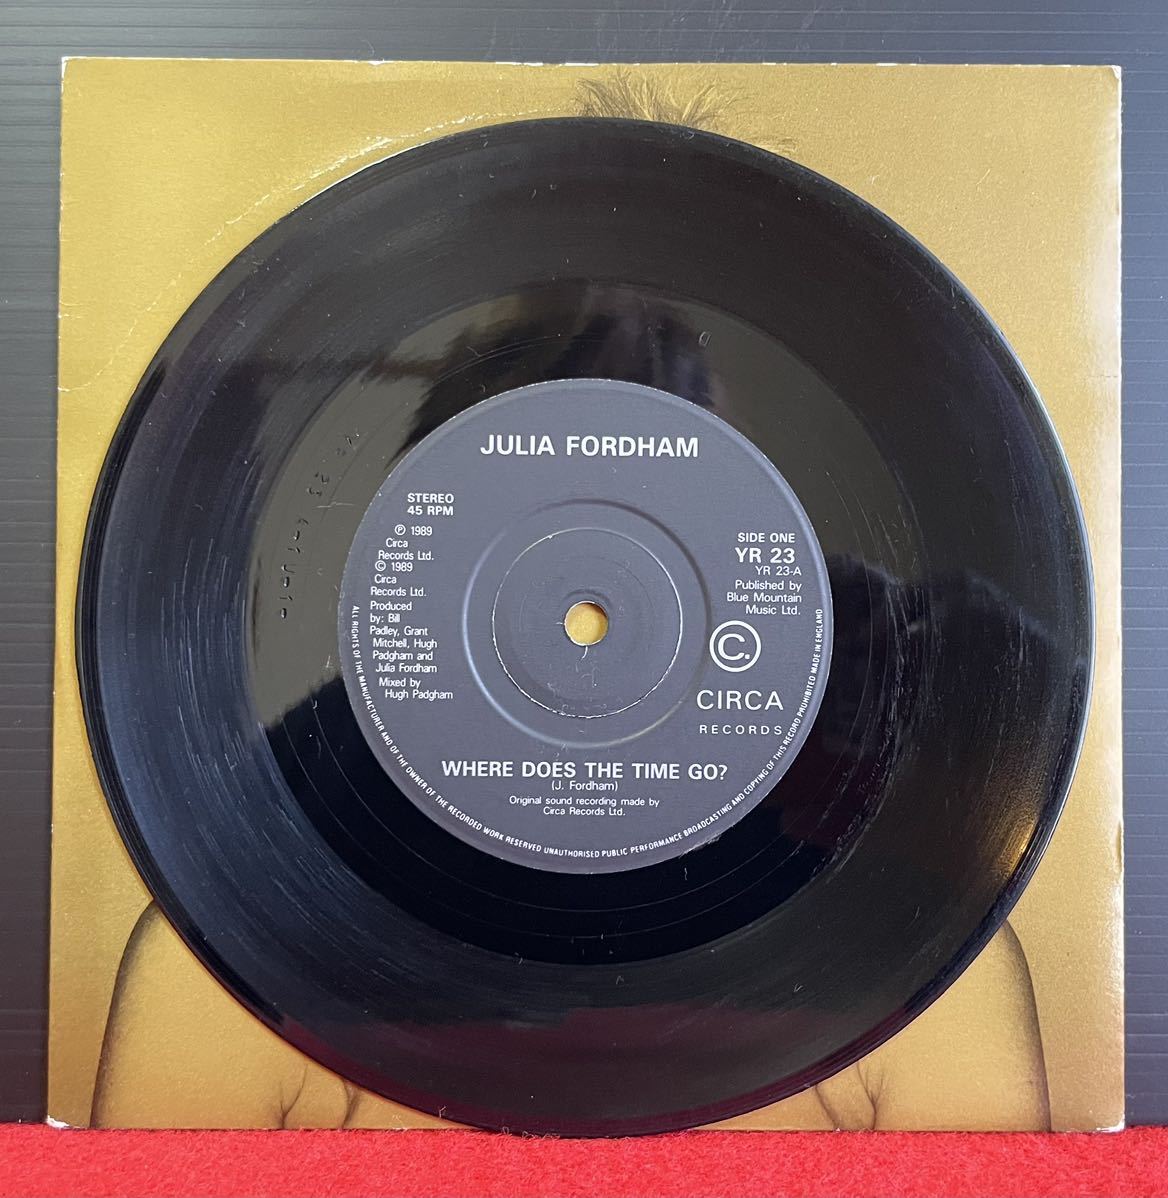 EP盤 Julia Fordham / Where Does The Time Go? 7inch盤 その他にもプロモーション盤 レア盤 人気レコード 多数出品。_画像4